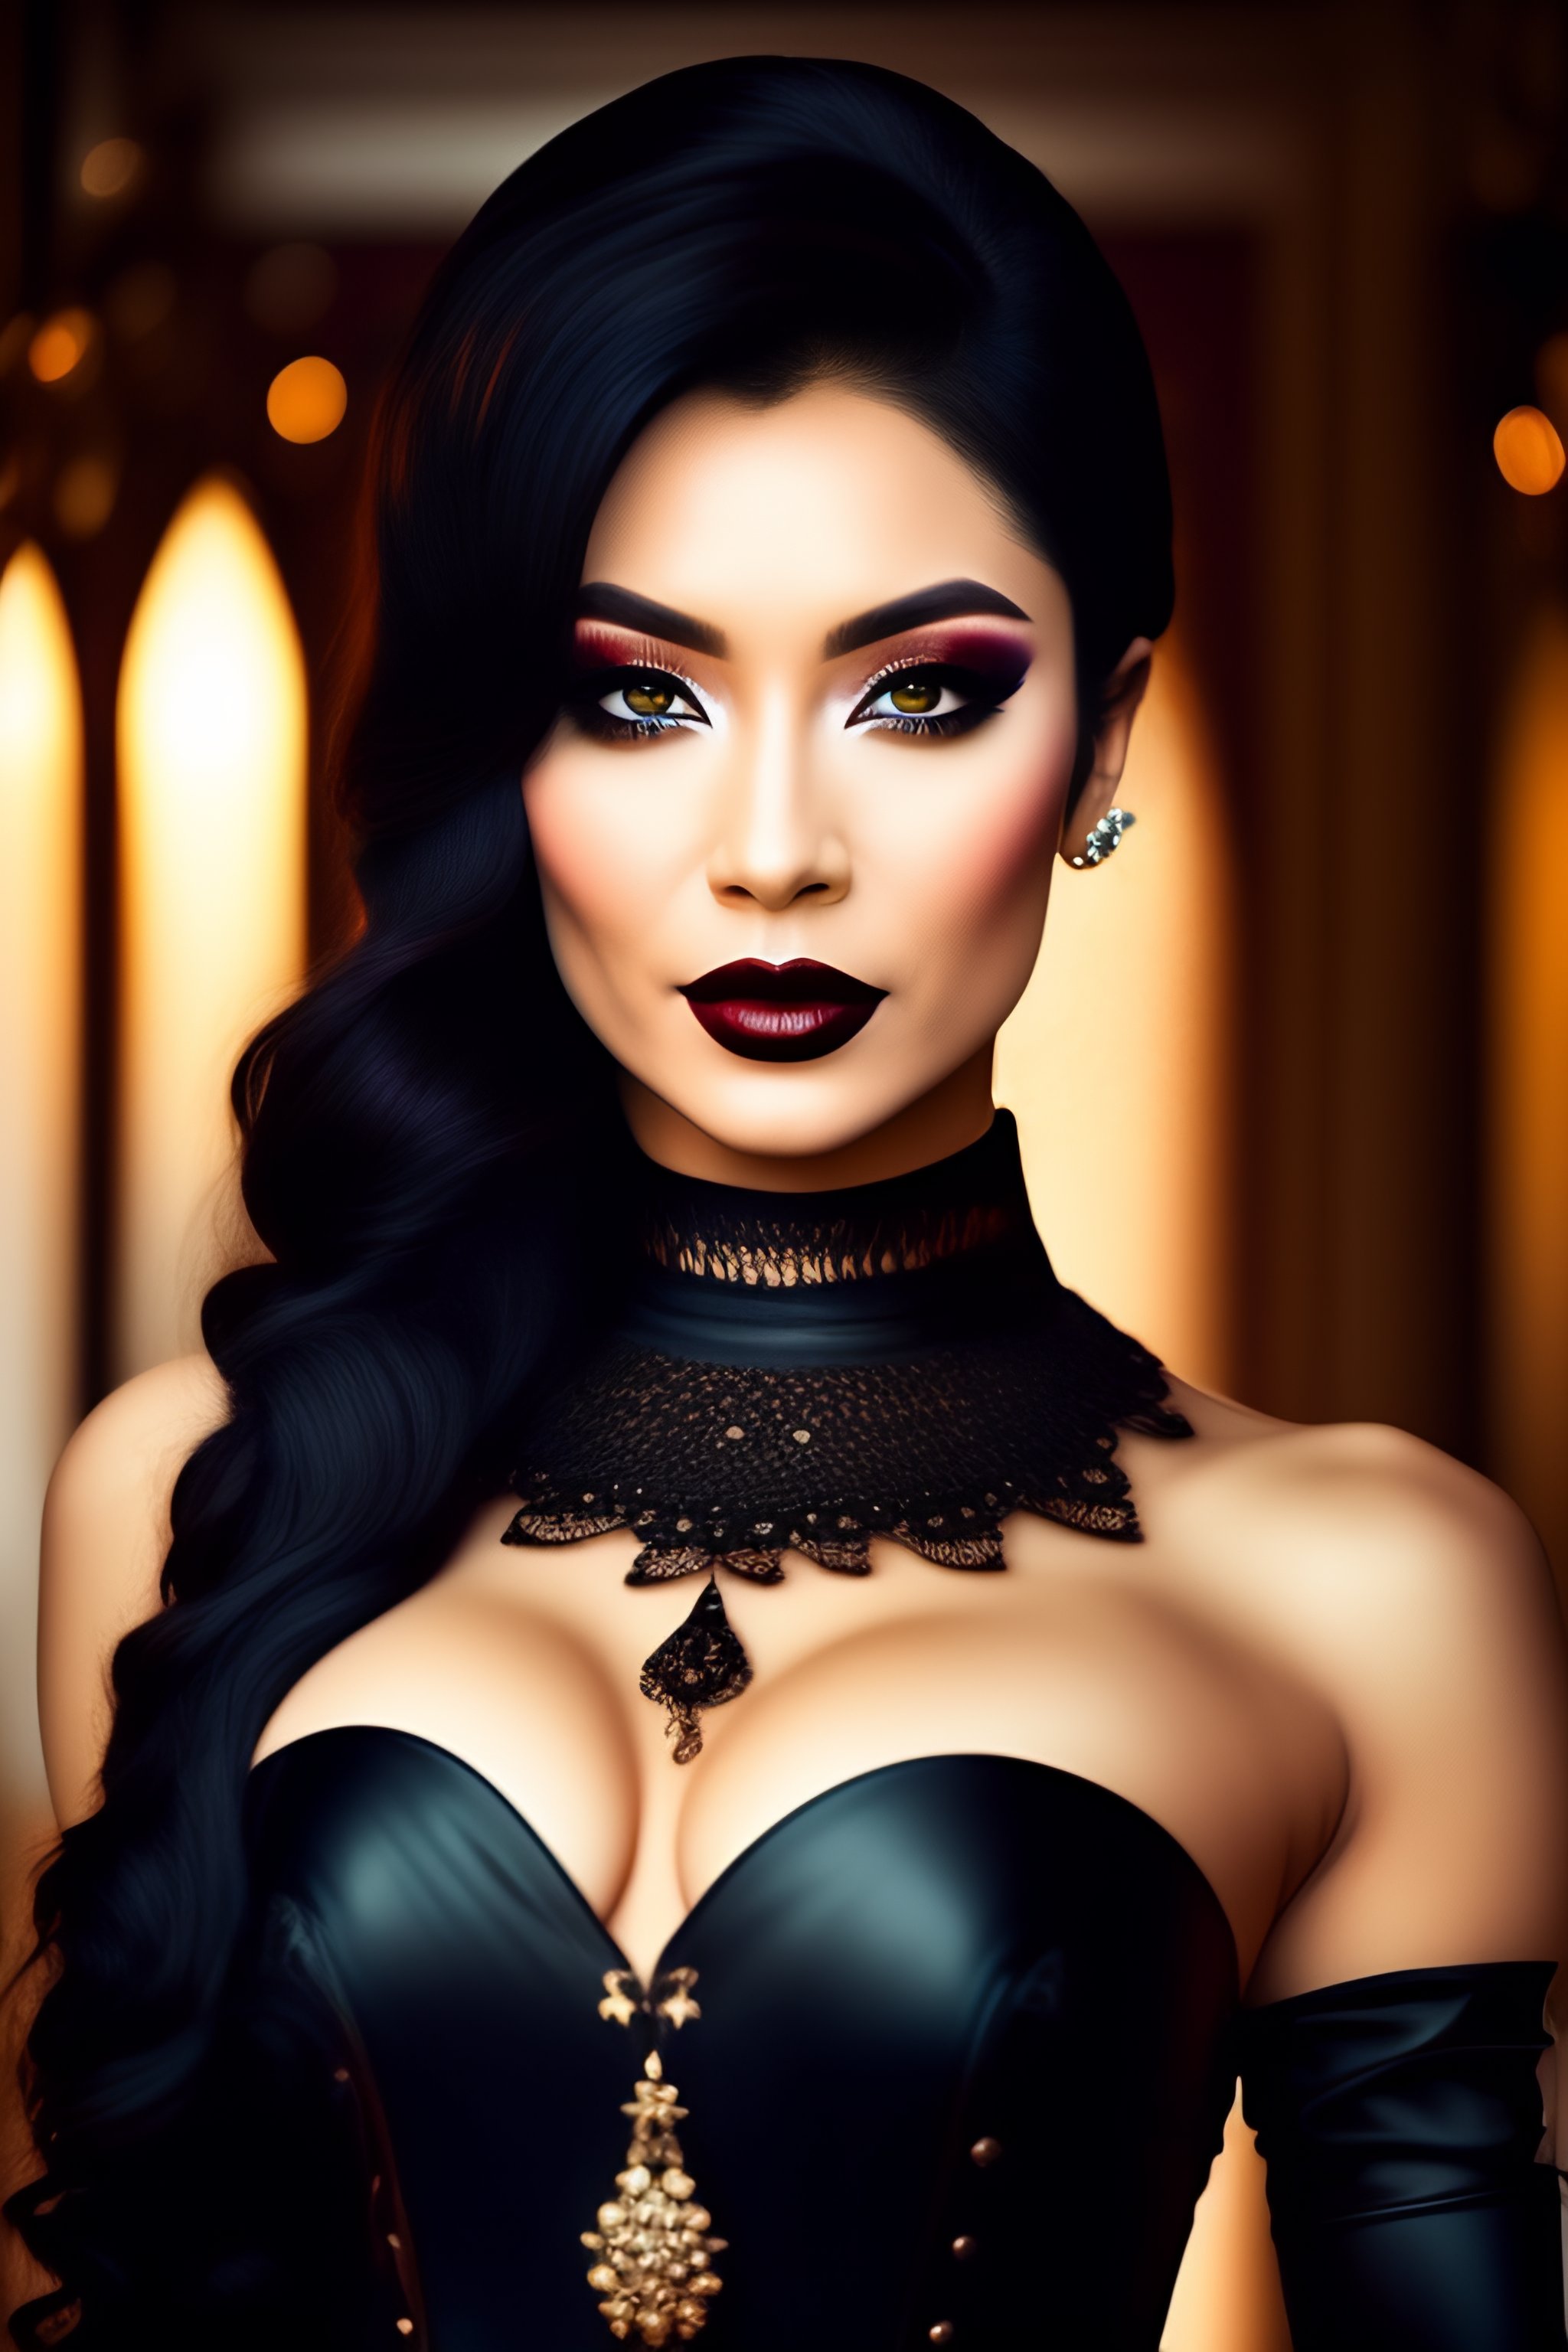 Lexica - Beautiful woman with bold and attractive features, wearing a corset,  gothic style and very tight clothing